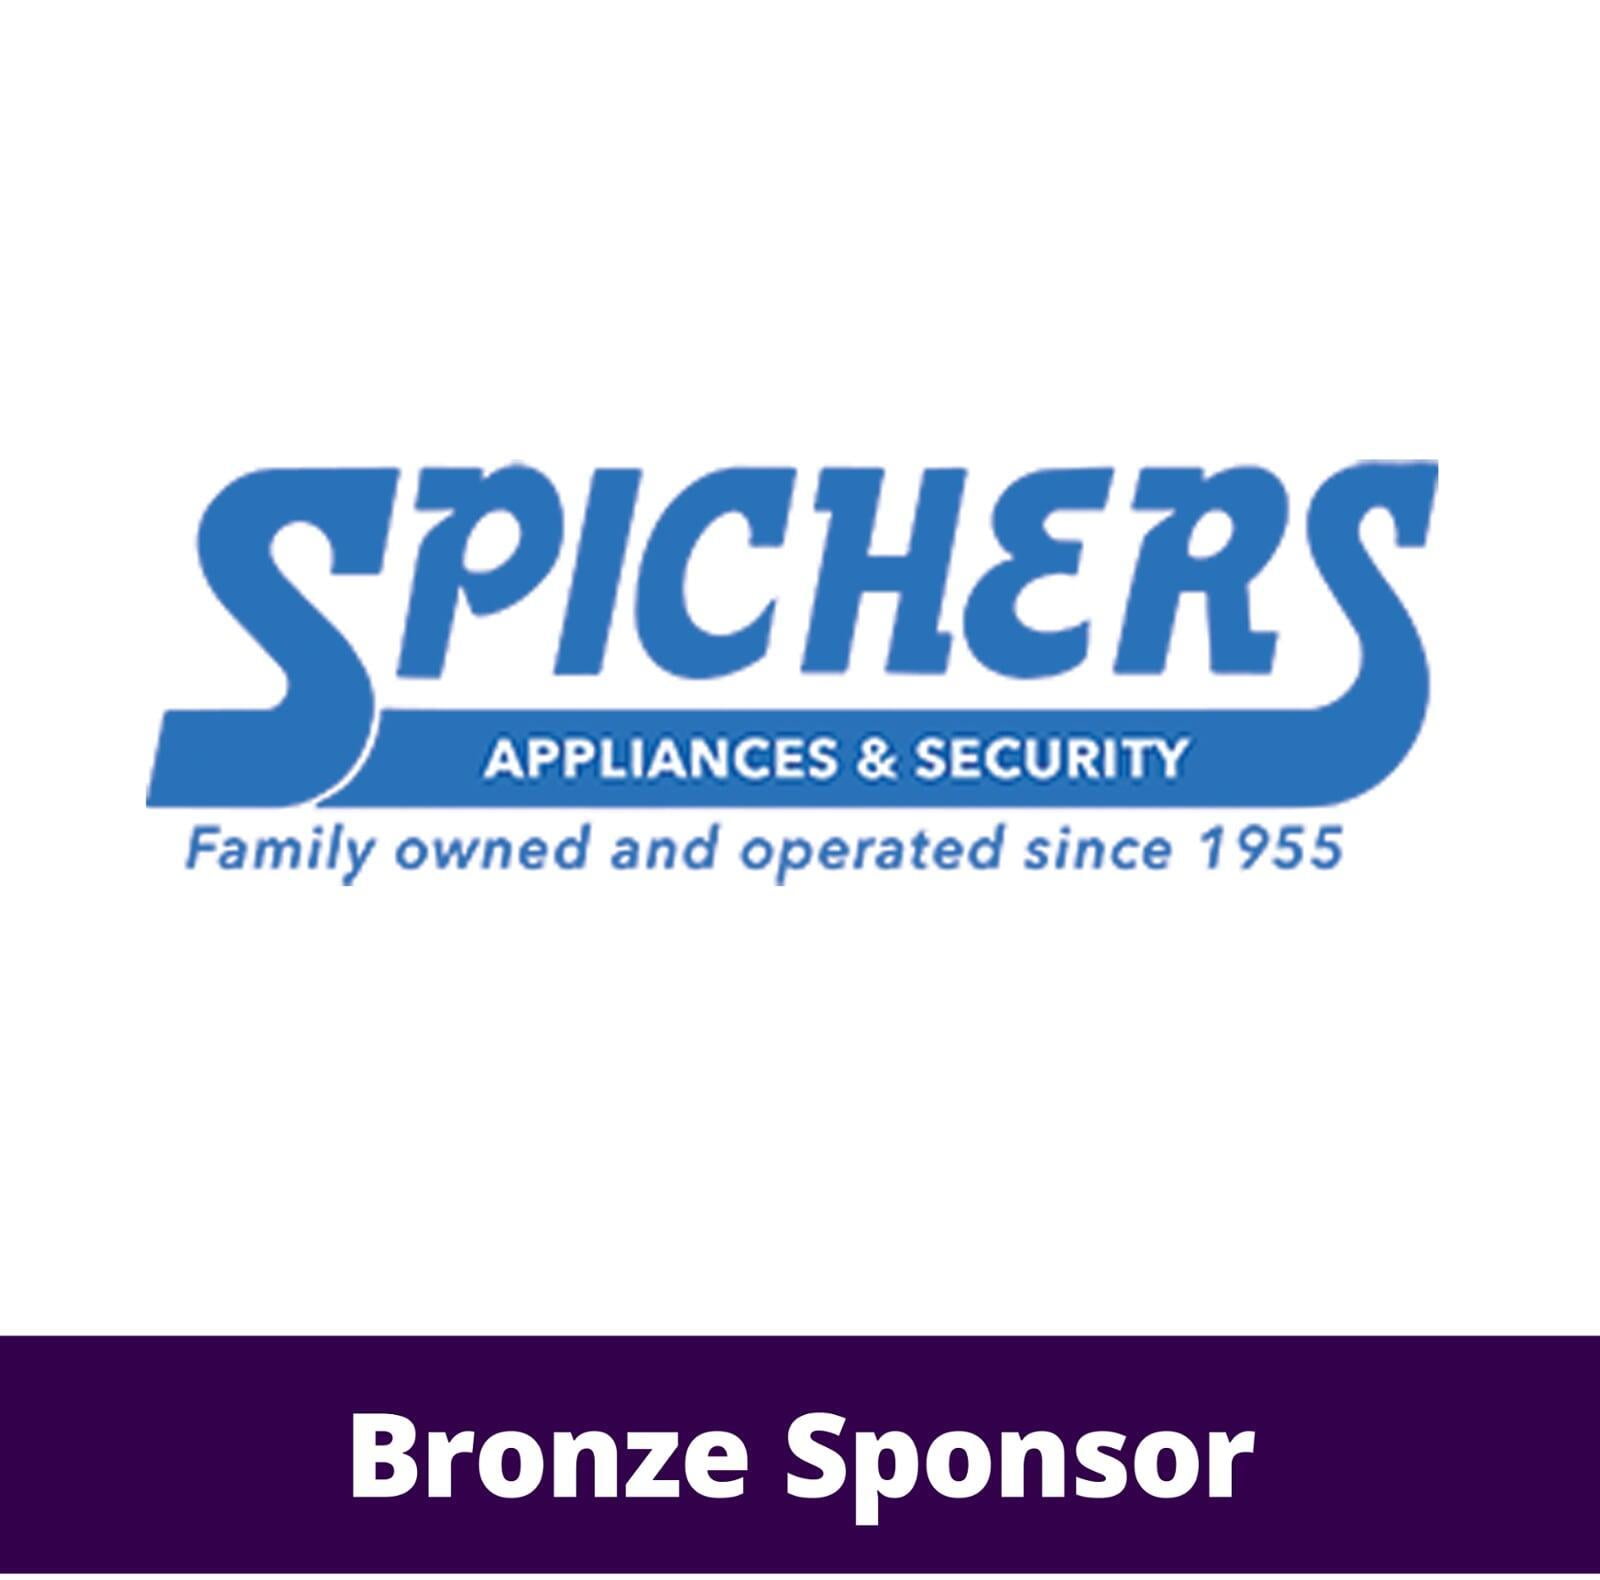 Spichers Appliances and Security logo